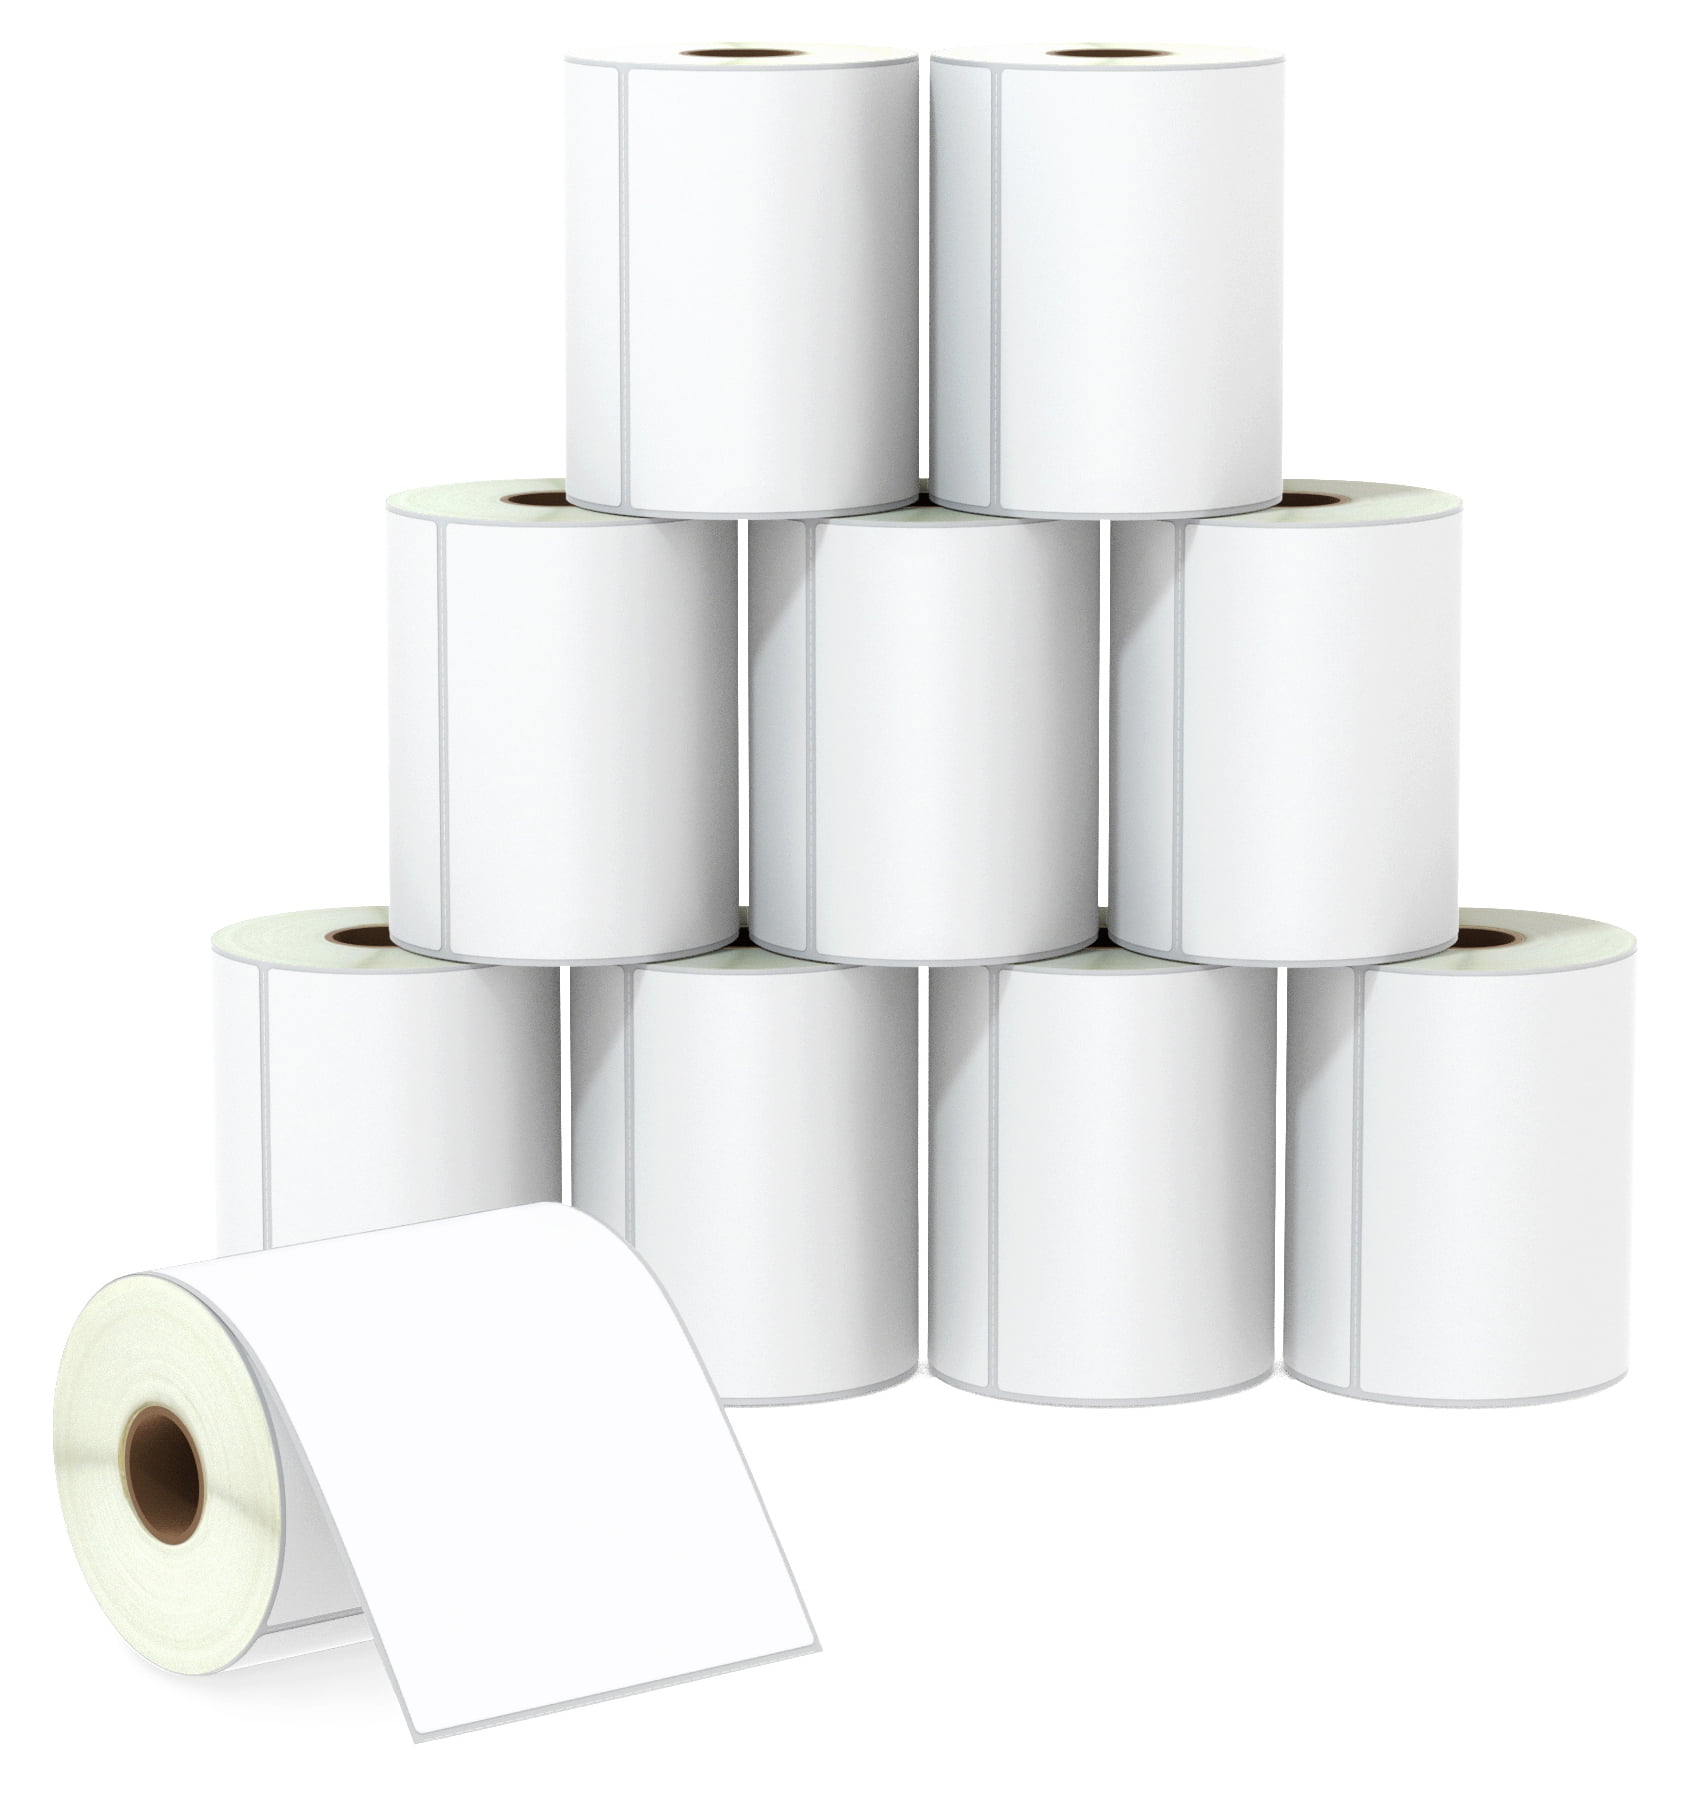 10 Rolls, 23500 Labels BETCKEY 1.5 x 0.5 File Folder & Address Labels Compatible with Zebra & Rollo Label Printer,Premium Adhesive & Perforated 